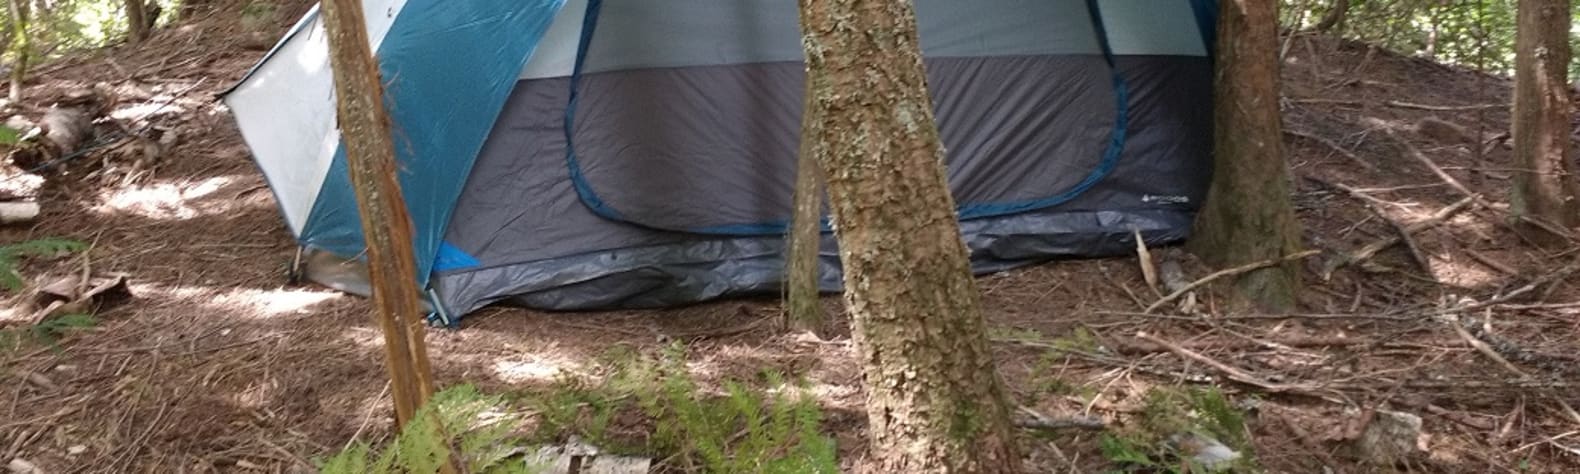 Tent Camping Among the Trees